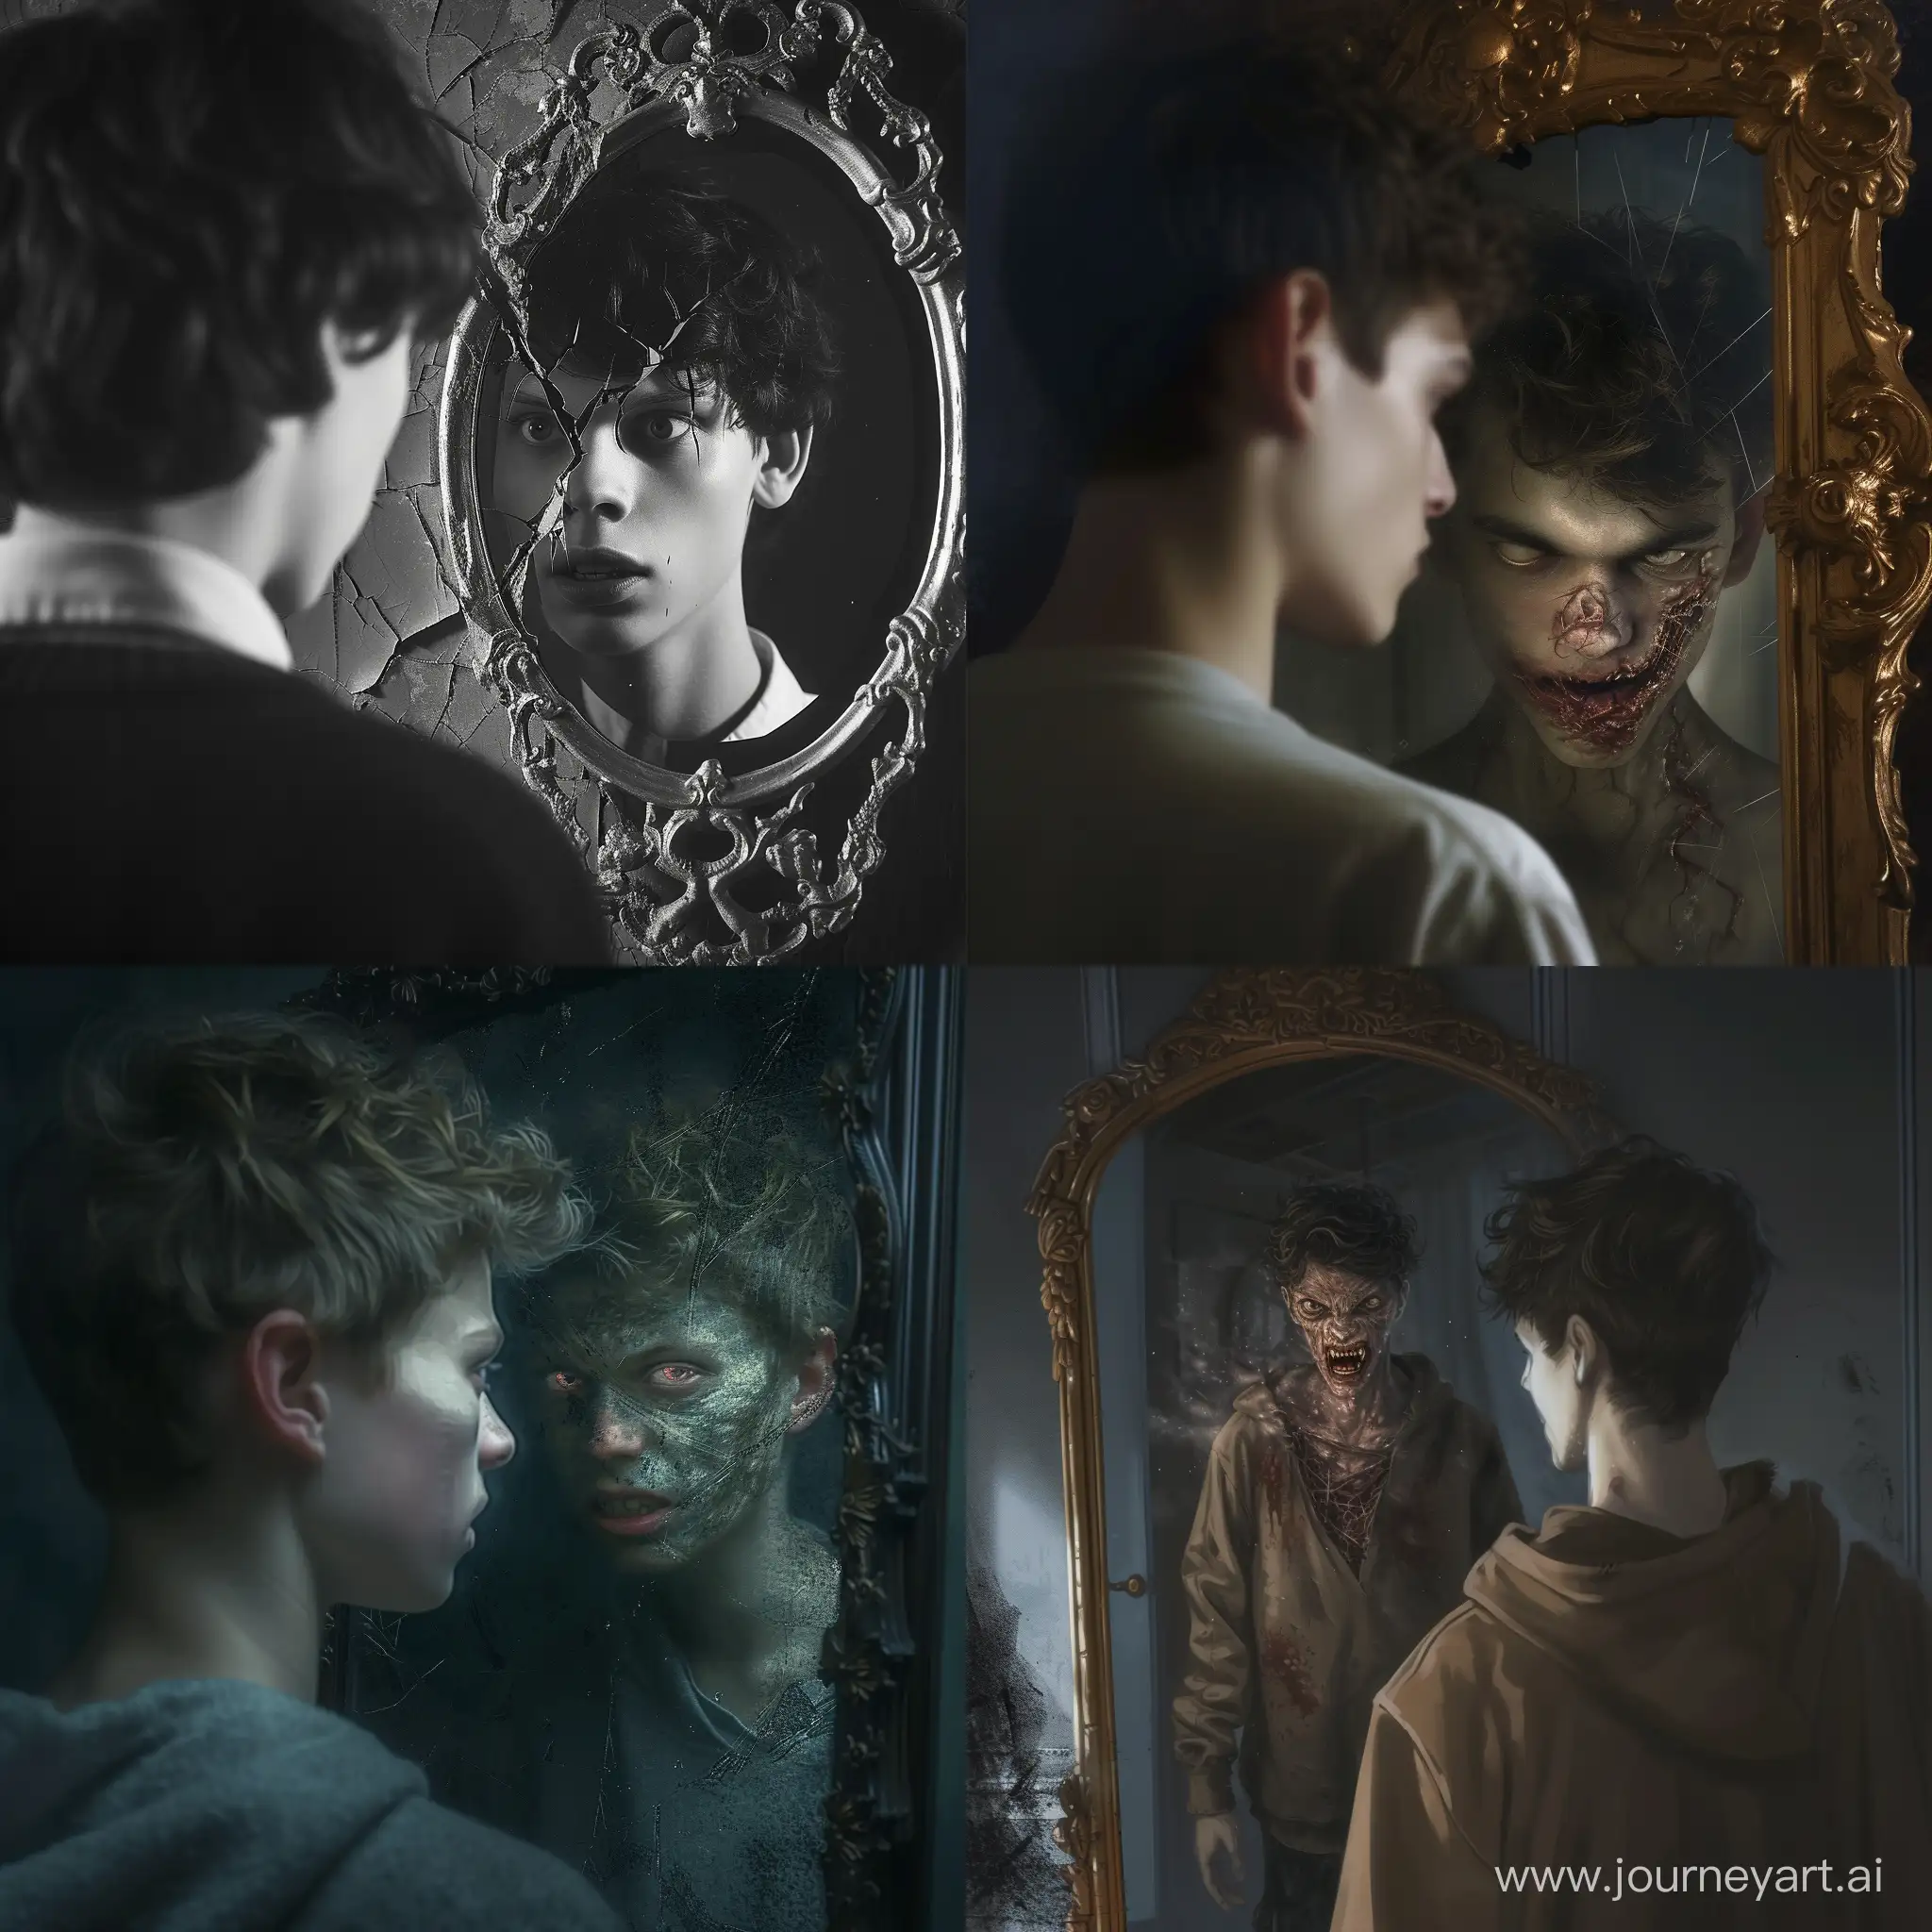 A young man looks into the mirror and sees his reflection in the form of an evil monster.